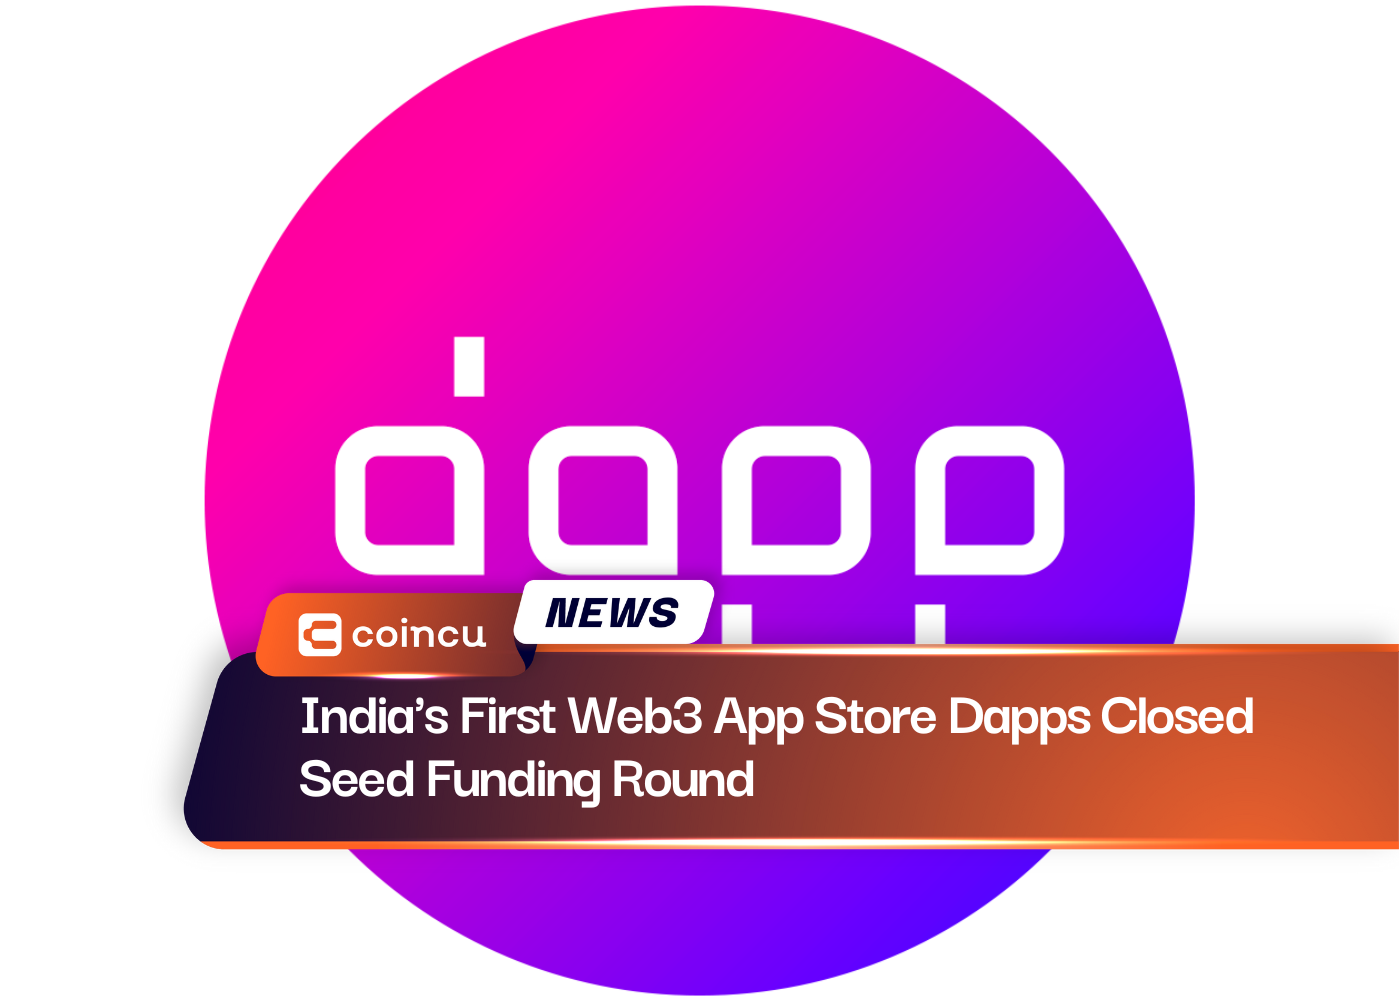 India's First Web3 App Store Dapps Closed Seed Funding Round